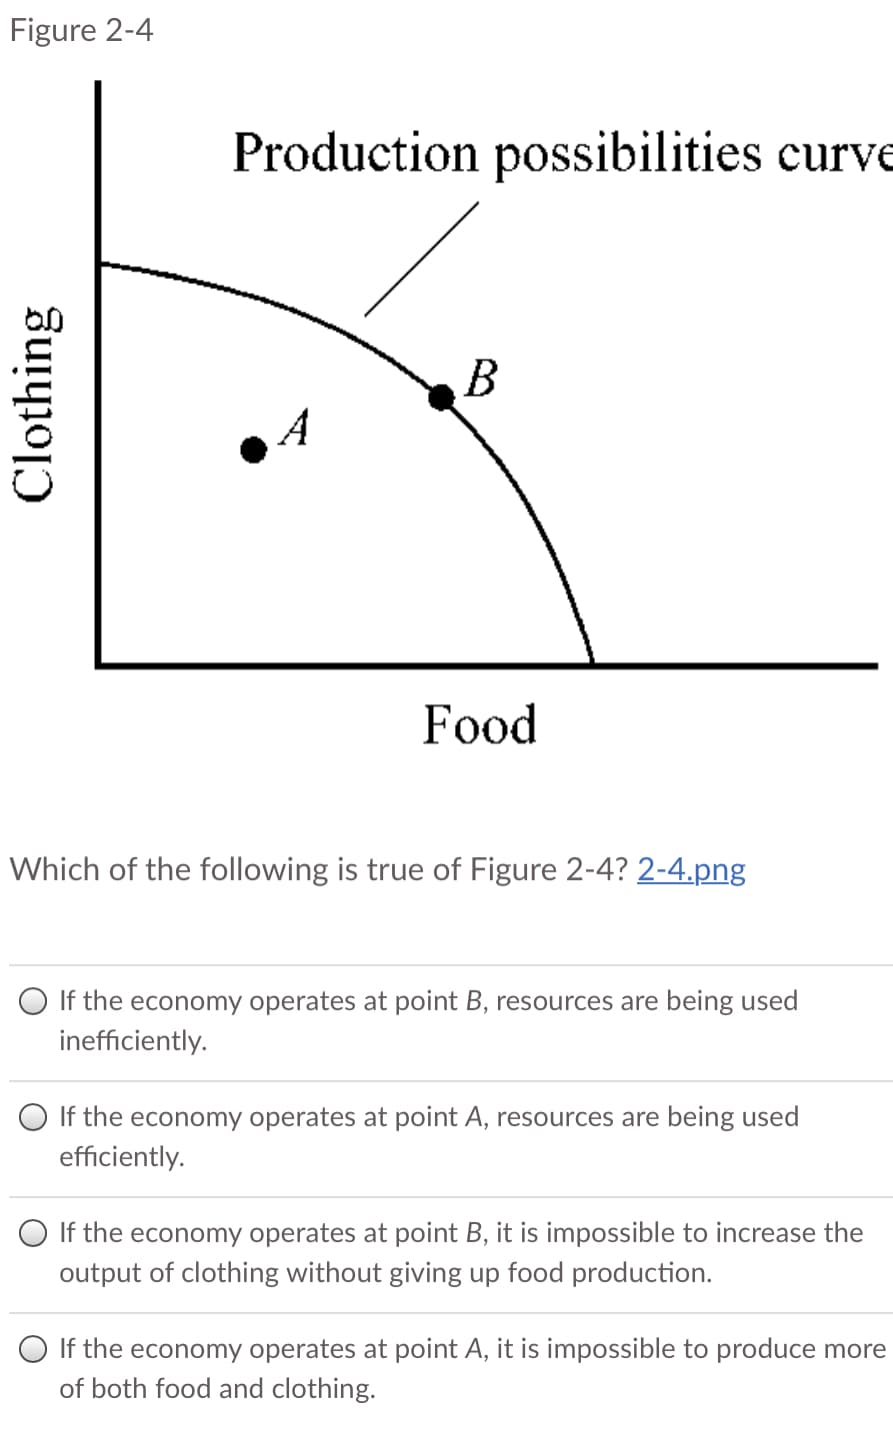 Figure 2-4
Production possibilities curve
B
A
Food
Which of the following is true of Figure 2-4? 2-4.png
If the economy operates at point B, resources are being used
inefficiently.
O If the economy operates at point A, resources are being used
efficiently.
If the economy operates at point B, it is impossible to increase the
output of clothing without giving up food production.
If the economy operates at point A, it is impossible to produce more
of both food and clothing.
Clothing
